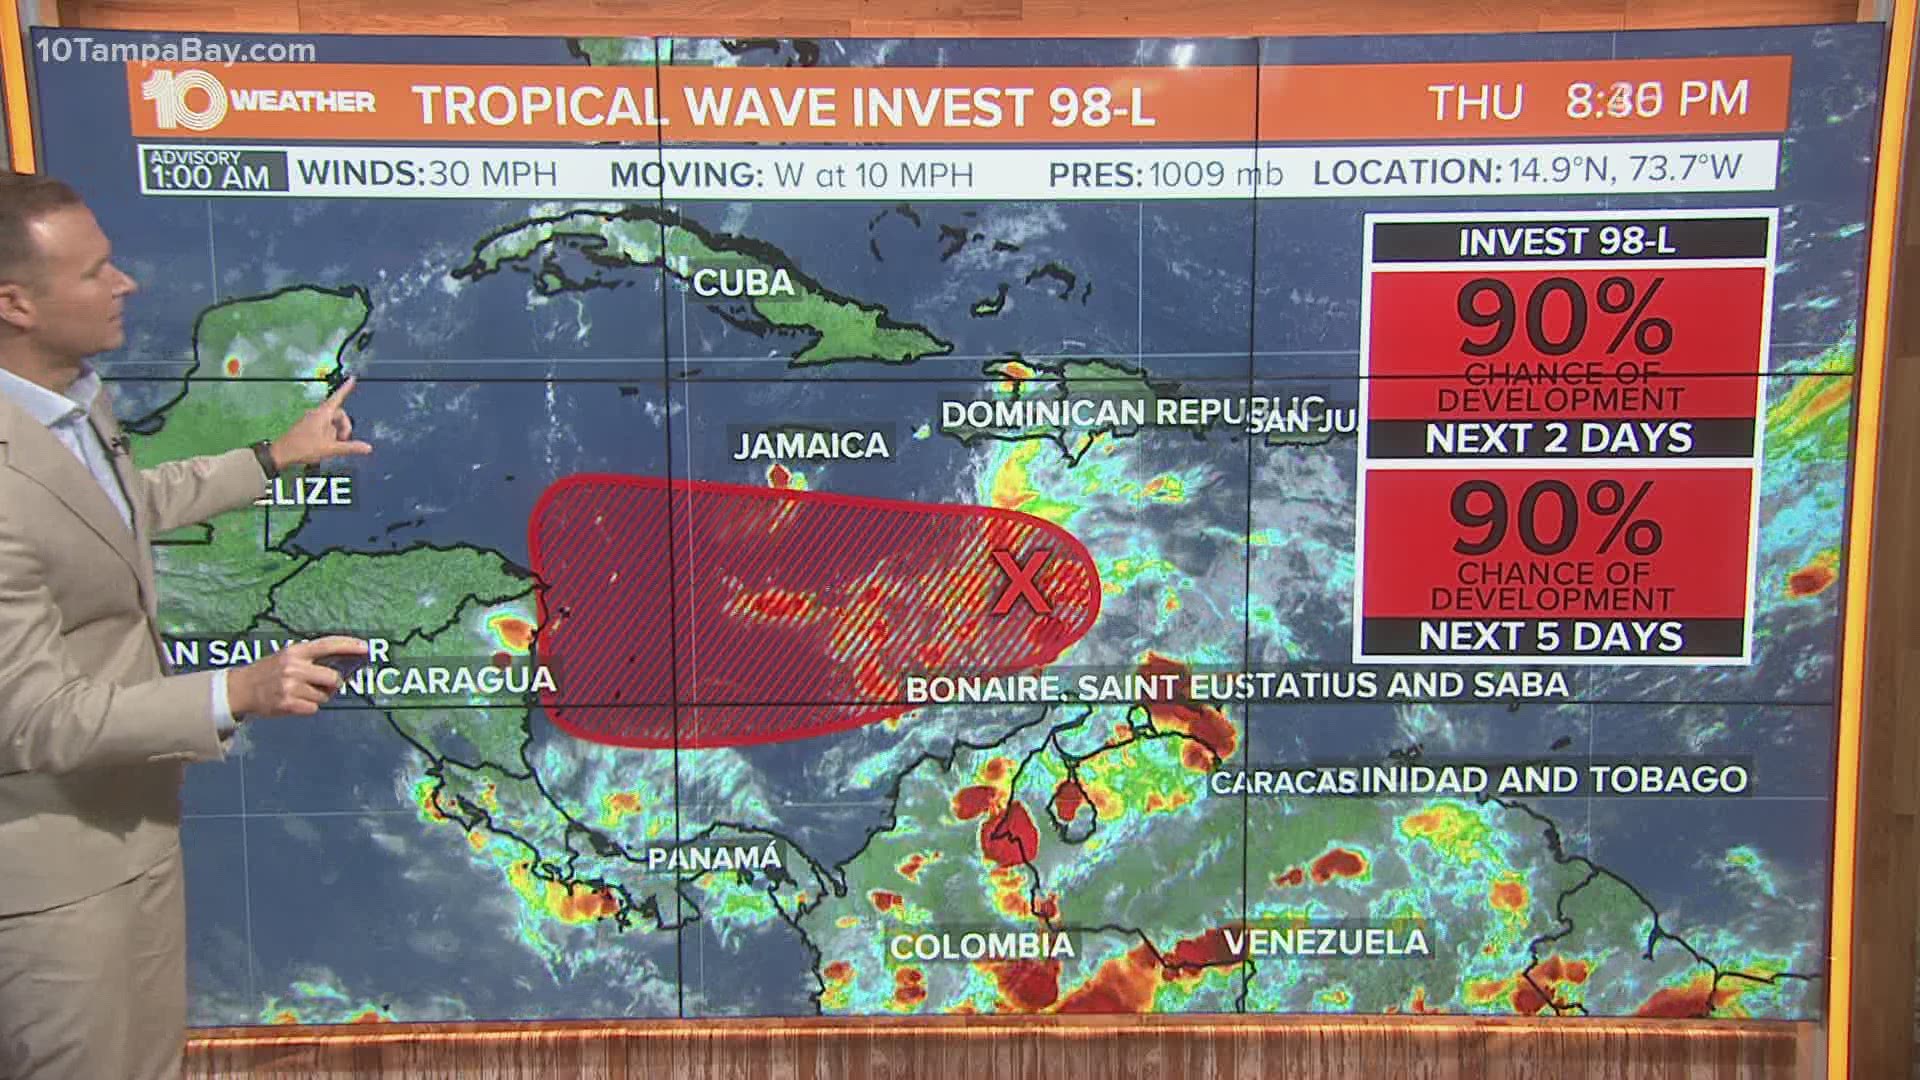 The NHC is tracking Invest 98-L which has an 90% chance of developing into a tropical cyclone by the weekend.